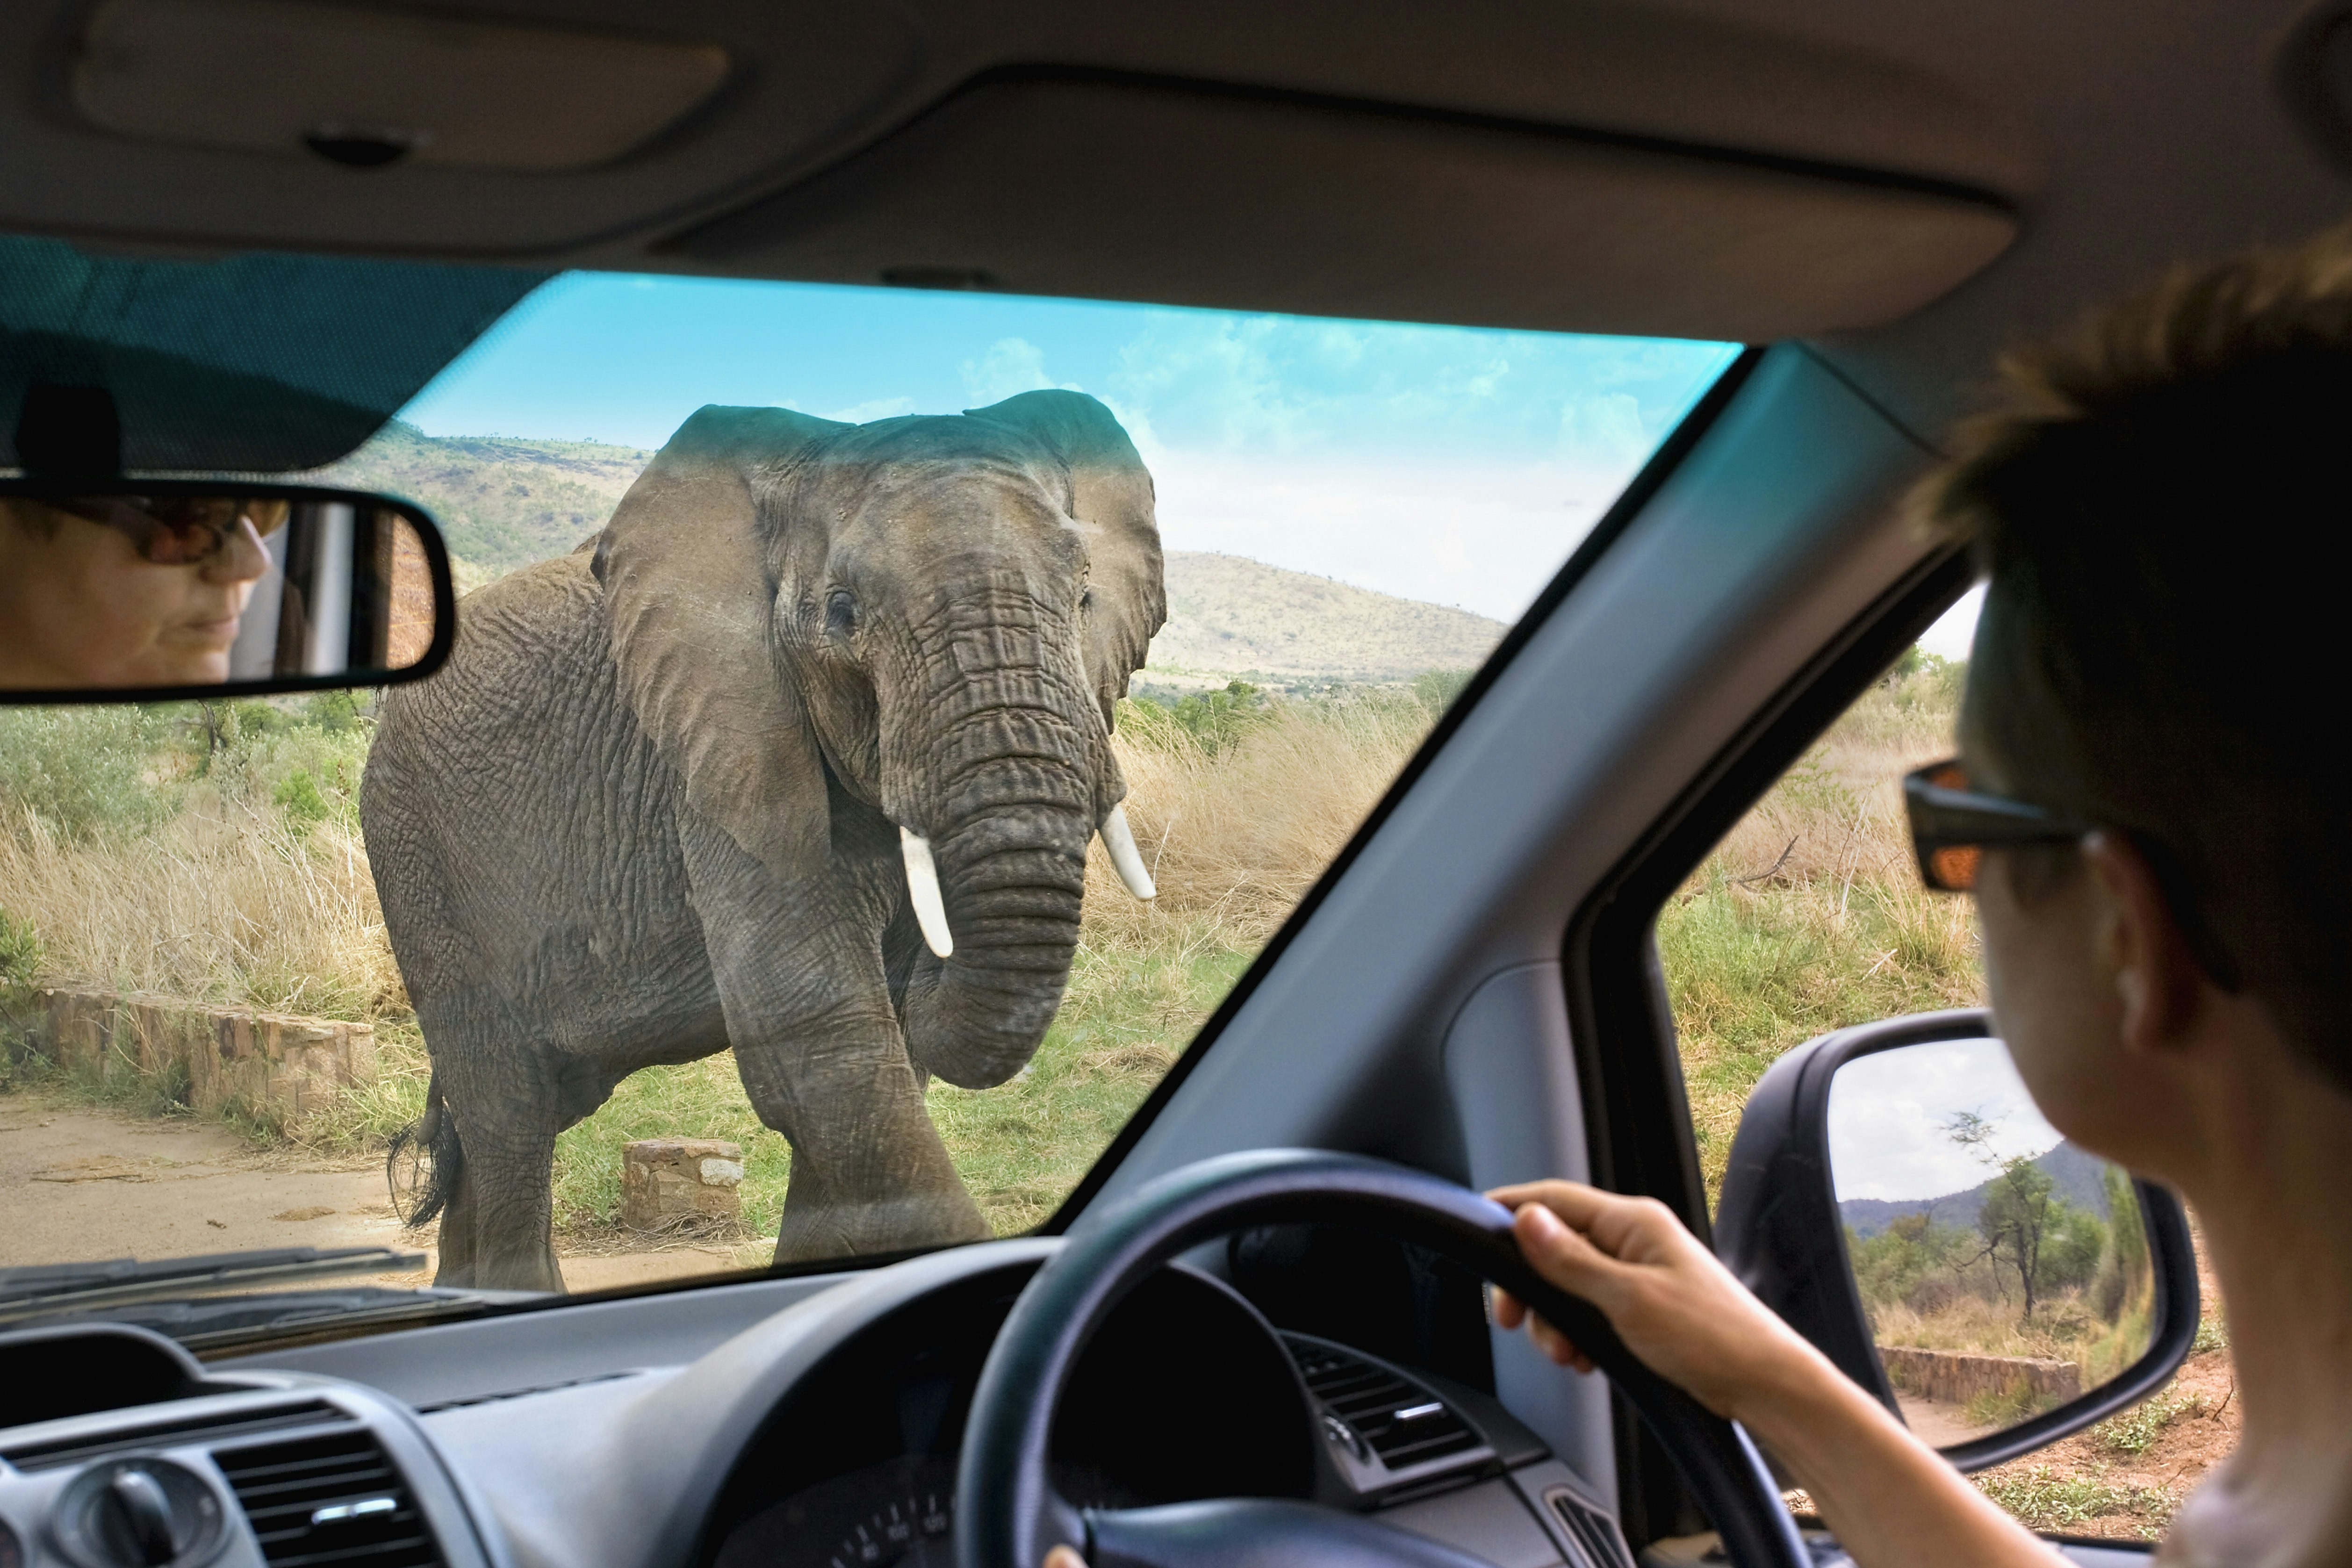 Shot from the inside of a 4WD, the image looks past the female drive to a huge elephant outside the front window.